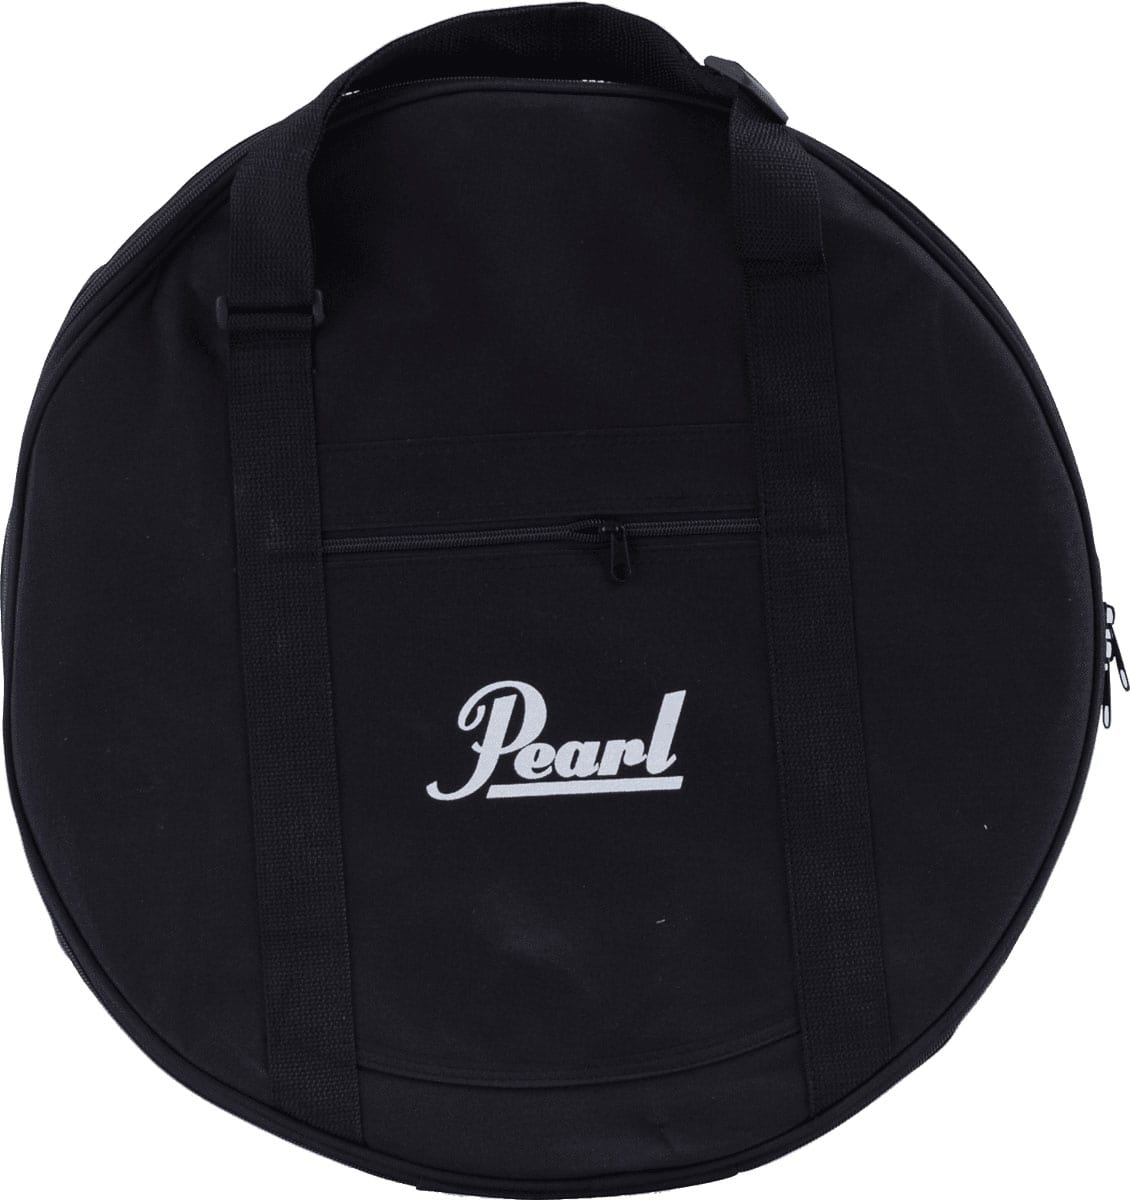 PEARL DRUMS BAG FOR COMPACT TRAVELER ADD-ON